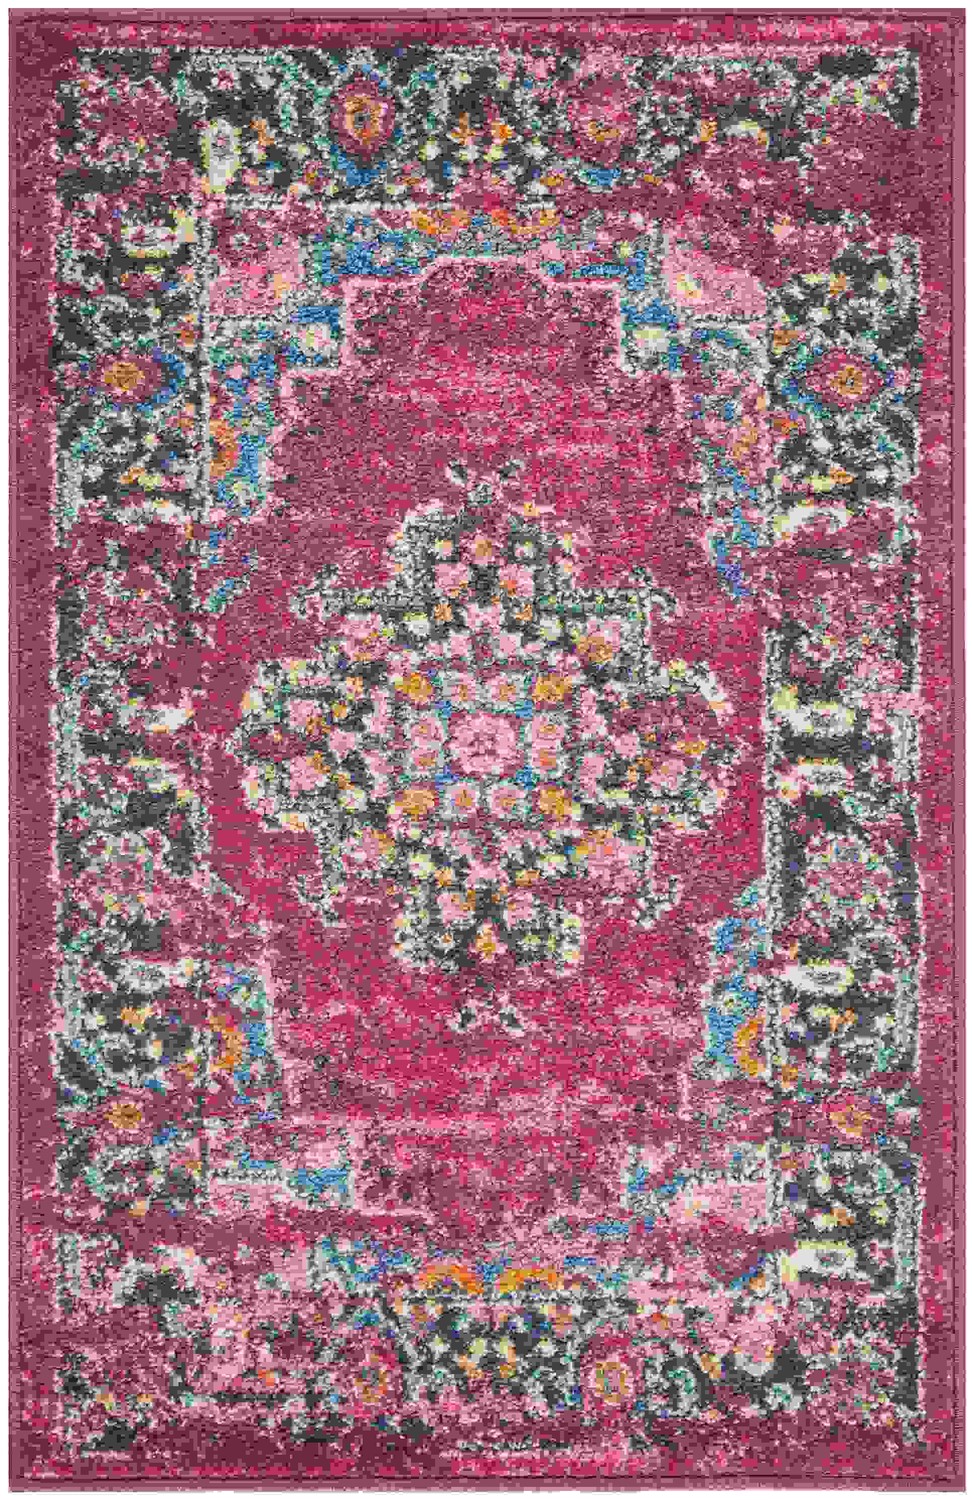 2 x 3 Fuchsia and Blue Distressed Scatter Rug